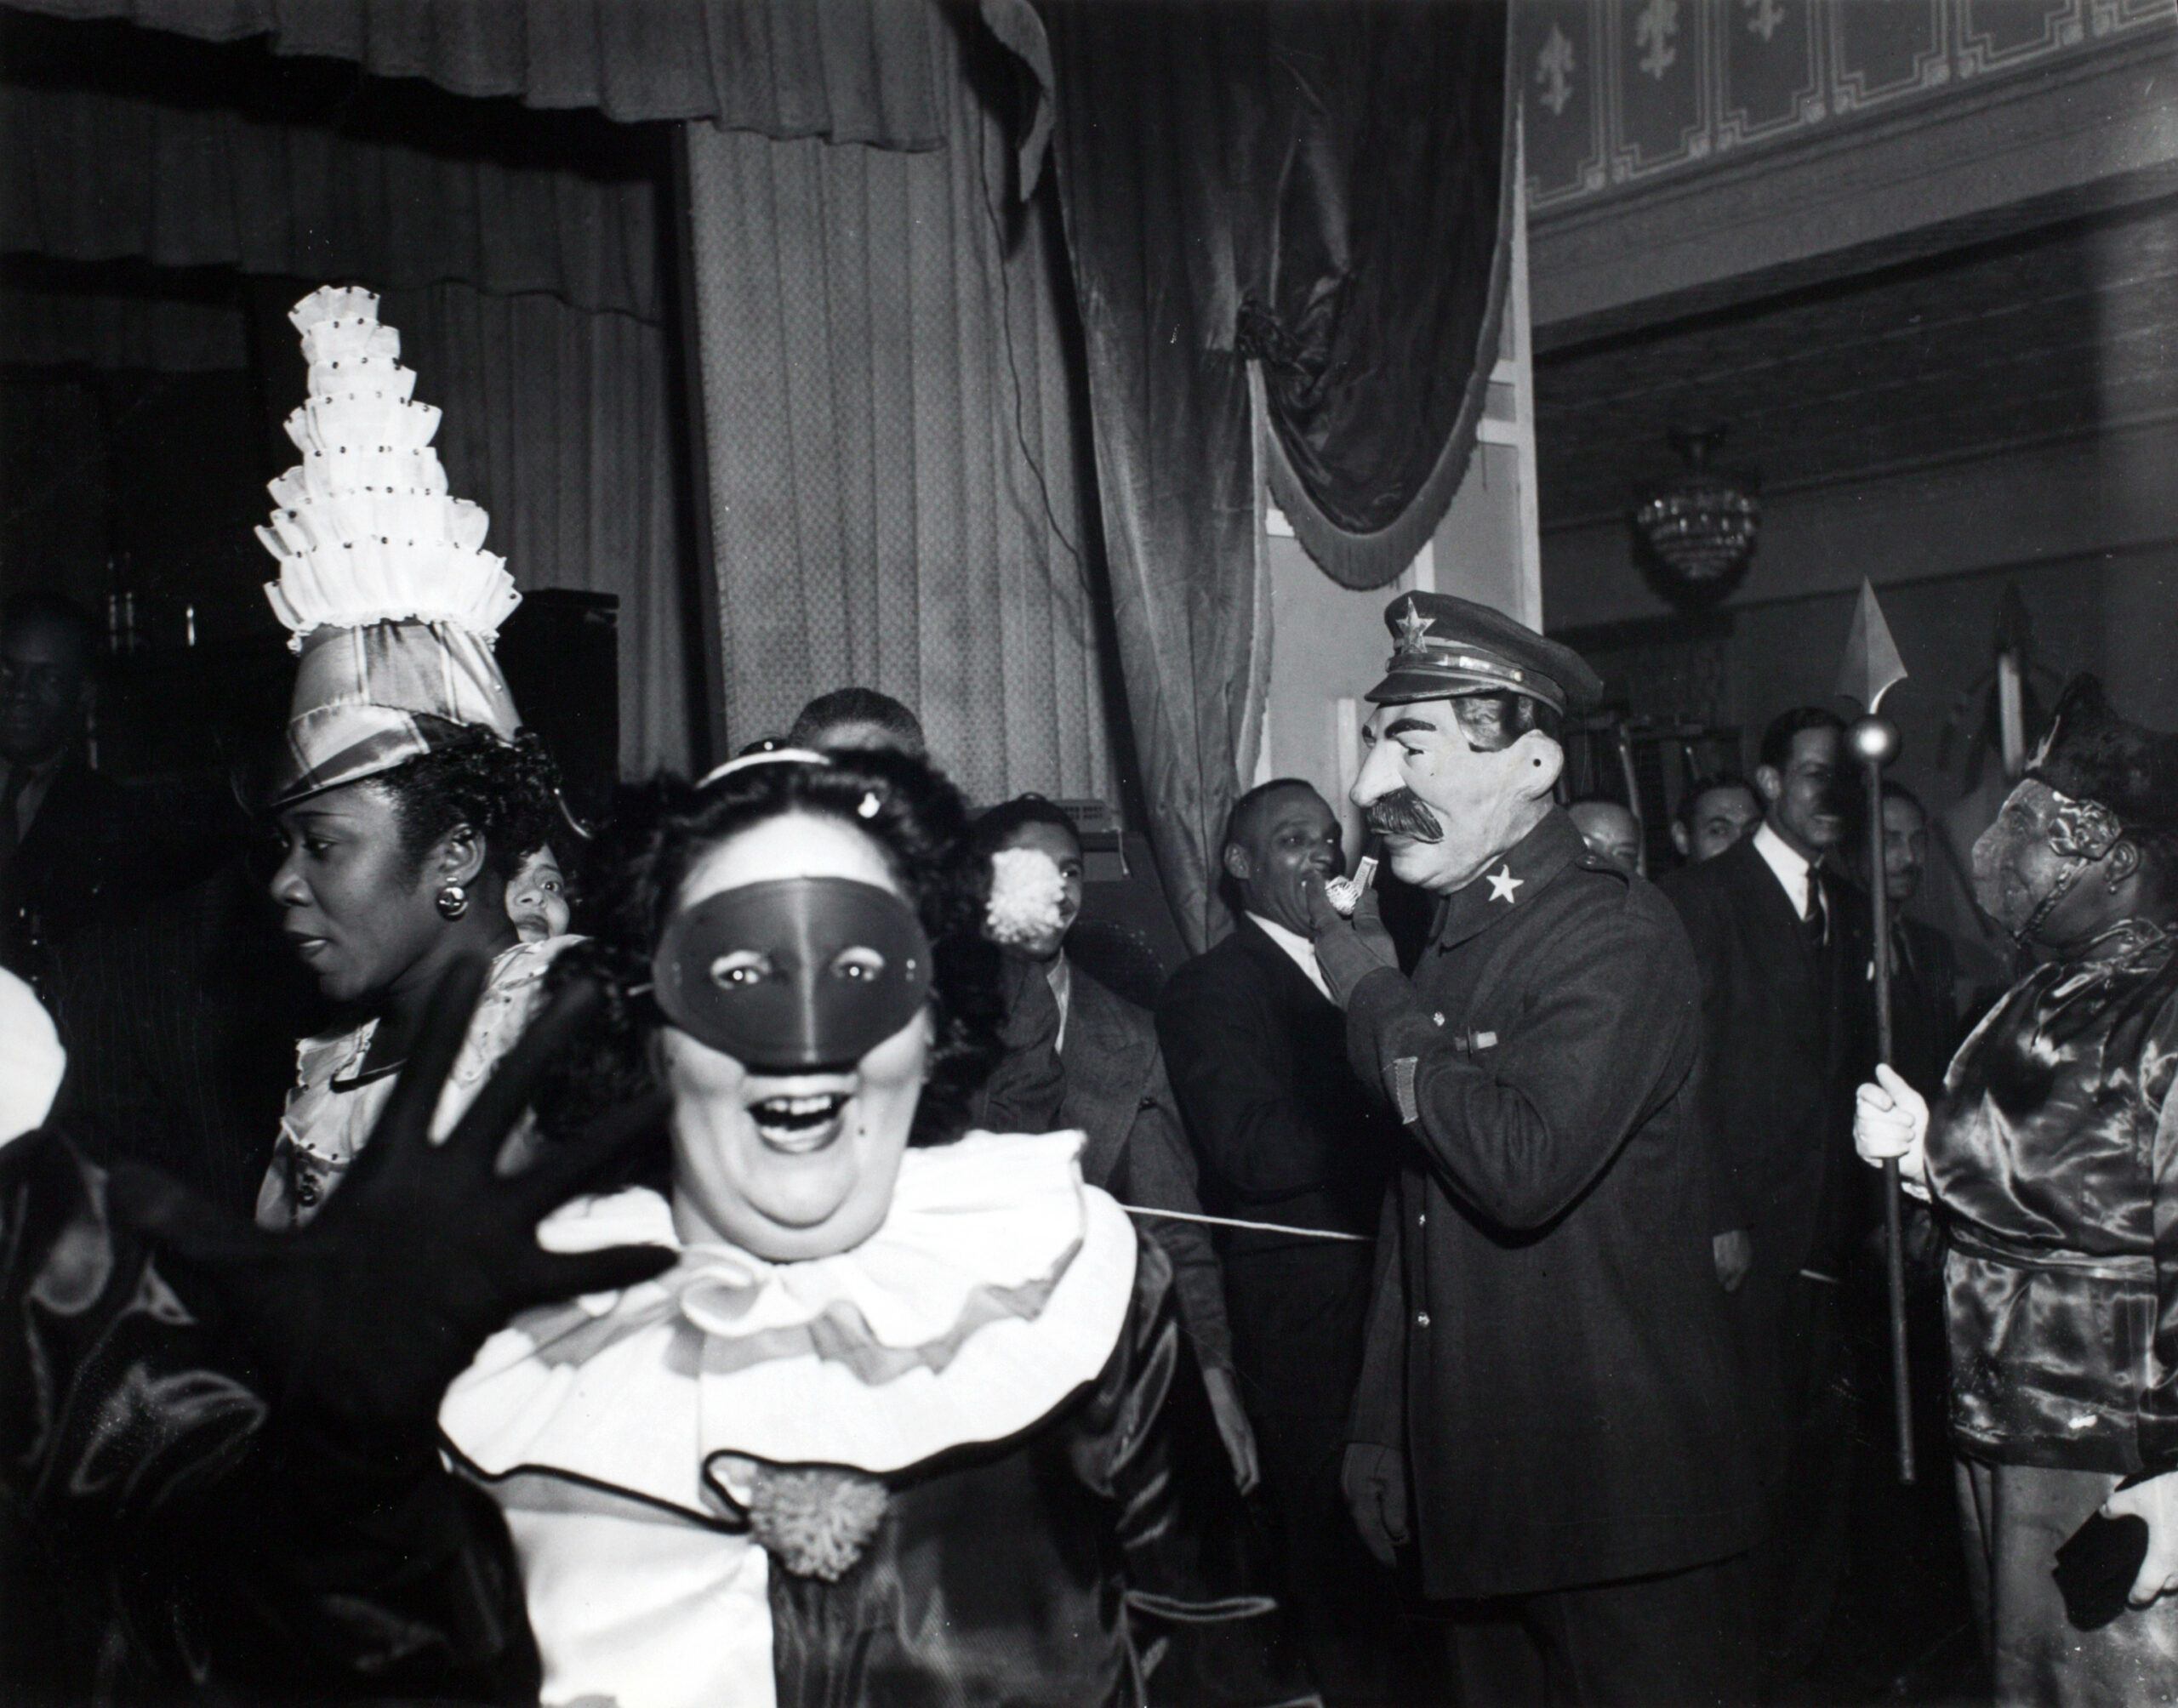 Holy Crap, There's A Weegee Print In The Magnum Square Print Sale! -  StreetShootr